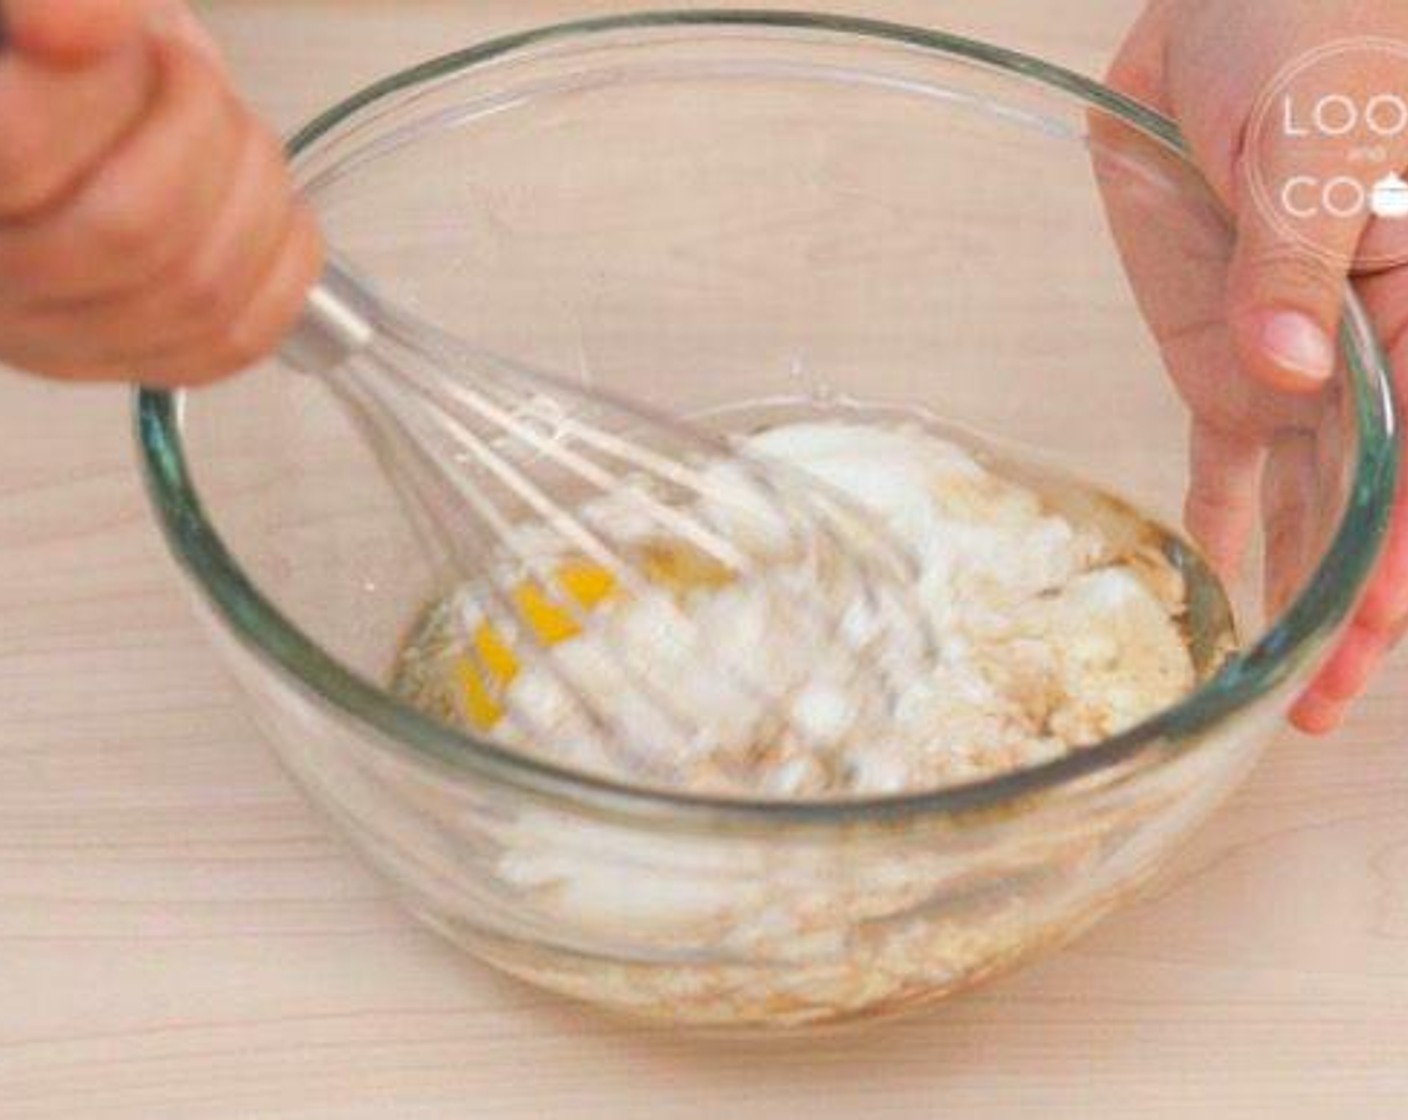 step 2 Add Farmhouse Eggs® Large Brown Egg (1), Yogurt (1 cup), Vegetable Oil (1/3 cup), Vanilla Essence (1/2 tsp) to a large bowl and whisk to a smooth consistency. Set aside wet ingredient mixture.